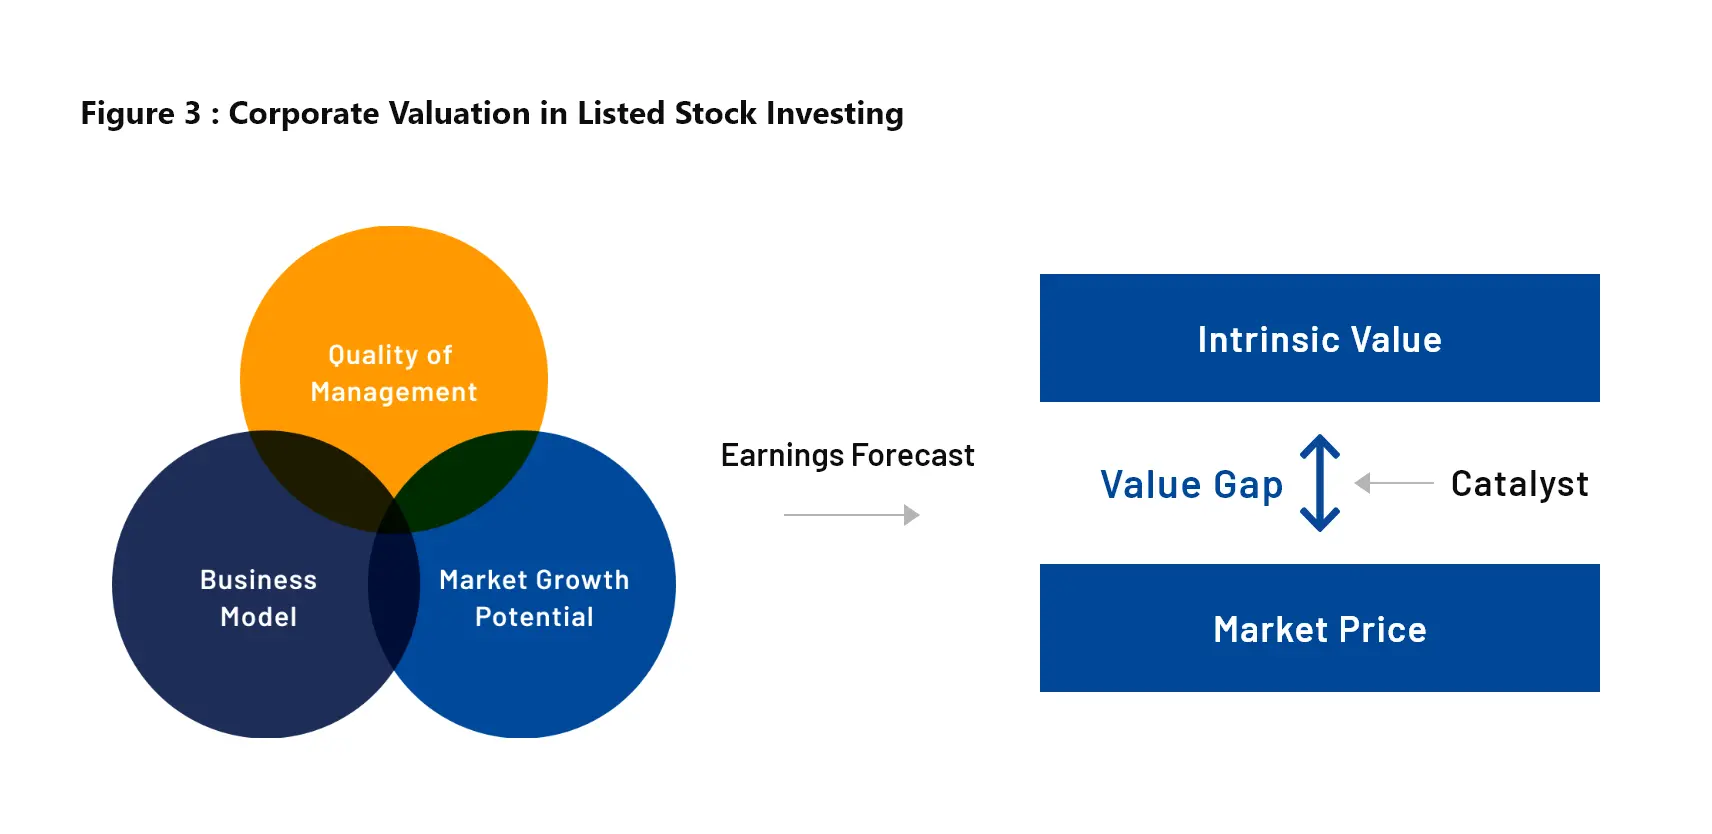 Figure 3: Corporate Valuation in Listed Stock Investing